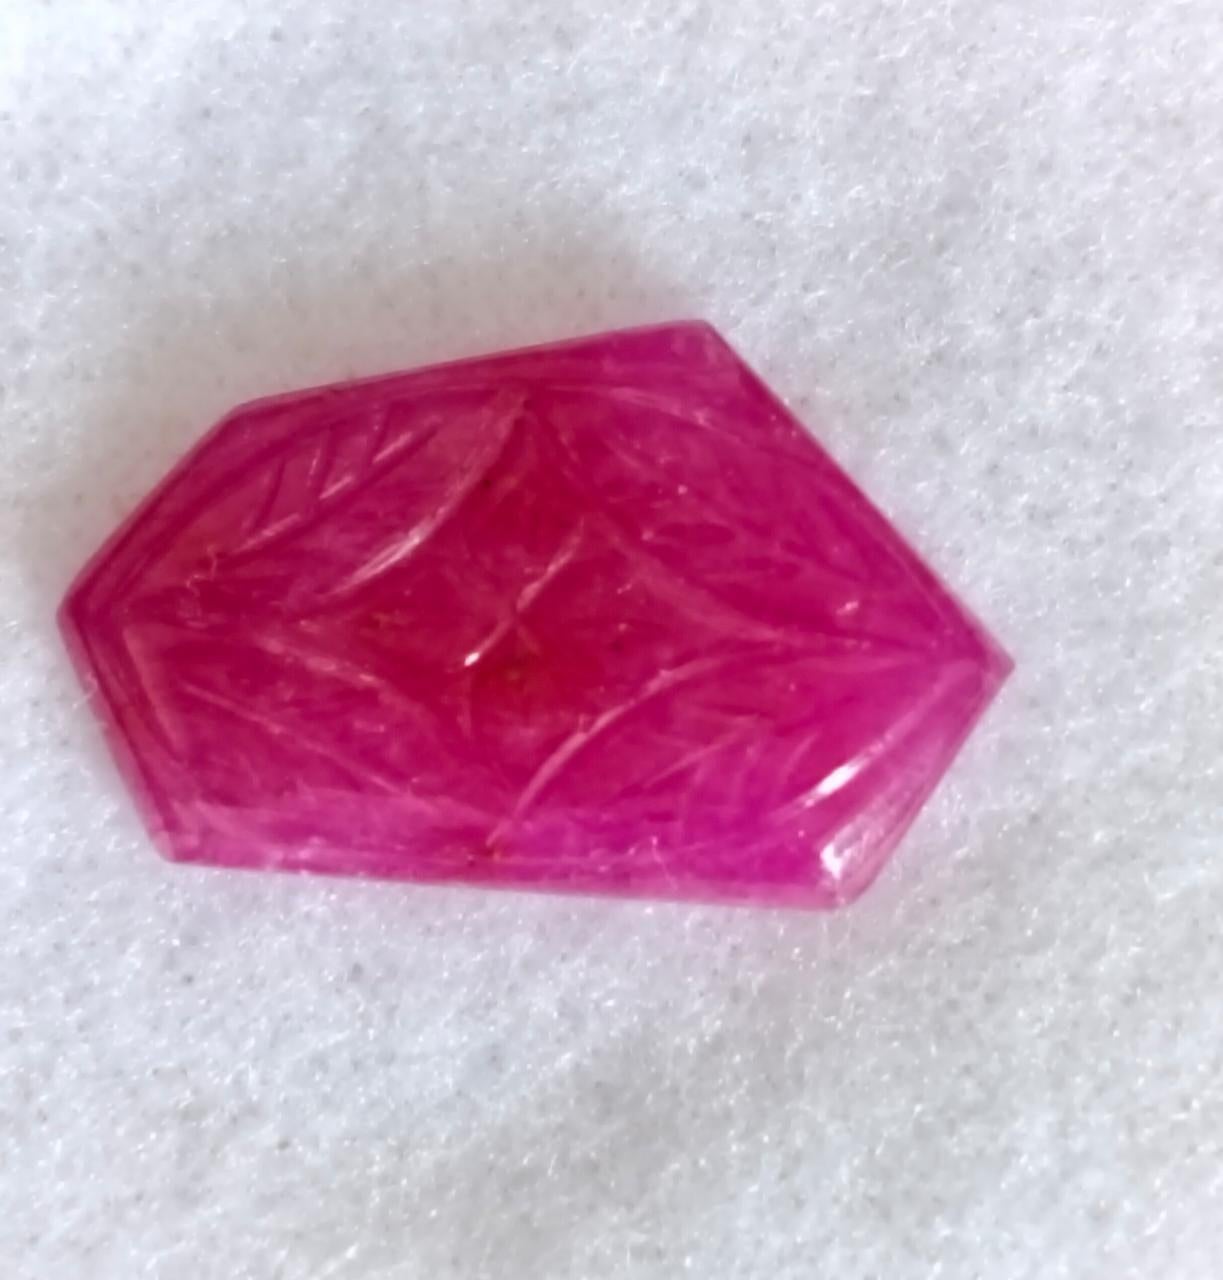 Natural Red Ruby Fancy Carving Fancy Gemstone.
11.82 Carat with a elegant Red color and excellent clarity. Also has an excellent fancy carving with ideal polish to show great shine and color . It will look authentic in jewelry. The dimensions of the